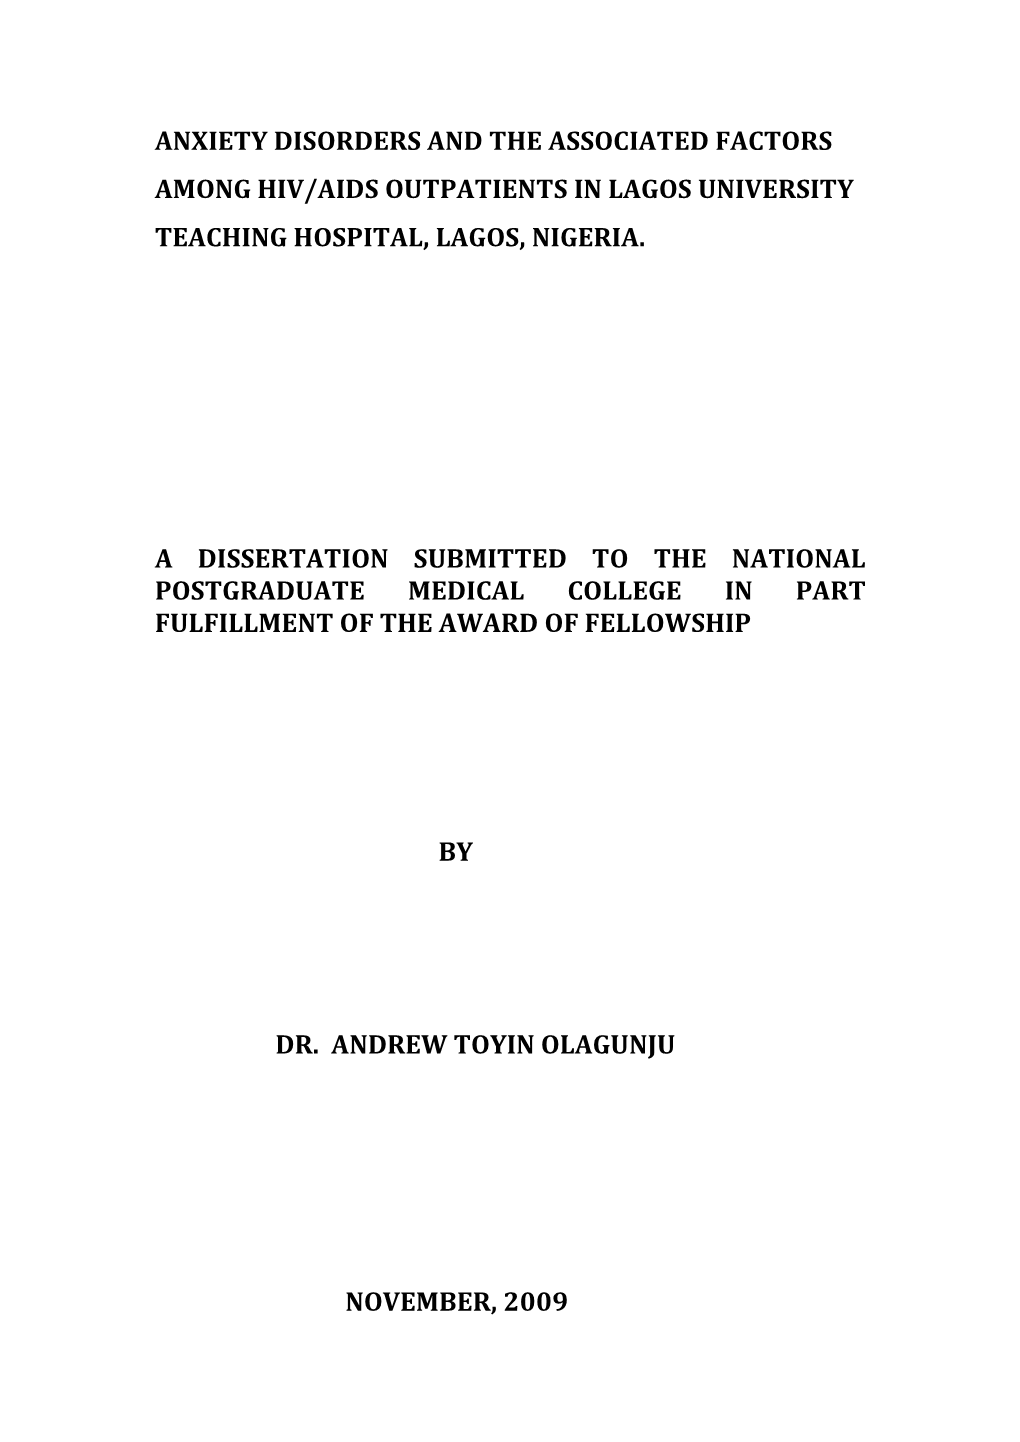 Anxiety Disorders and the Associated Factors Among Hiv/Aids Outpatients in Lagos University Teaching Hospital, Lagos, Nigeria